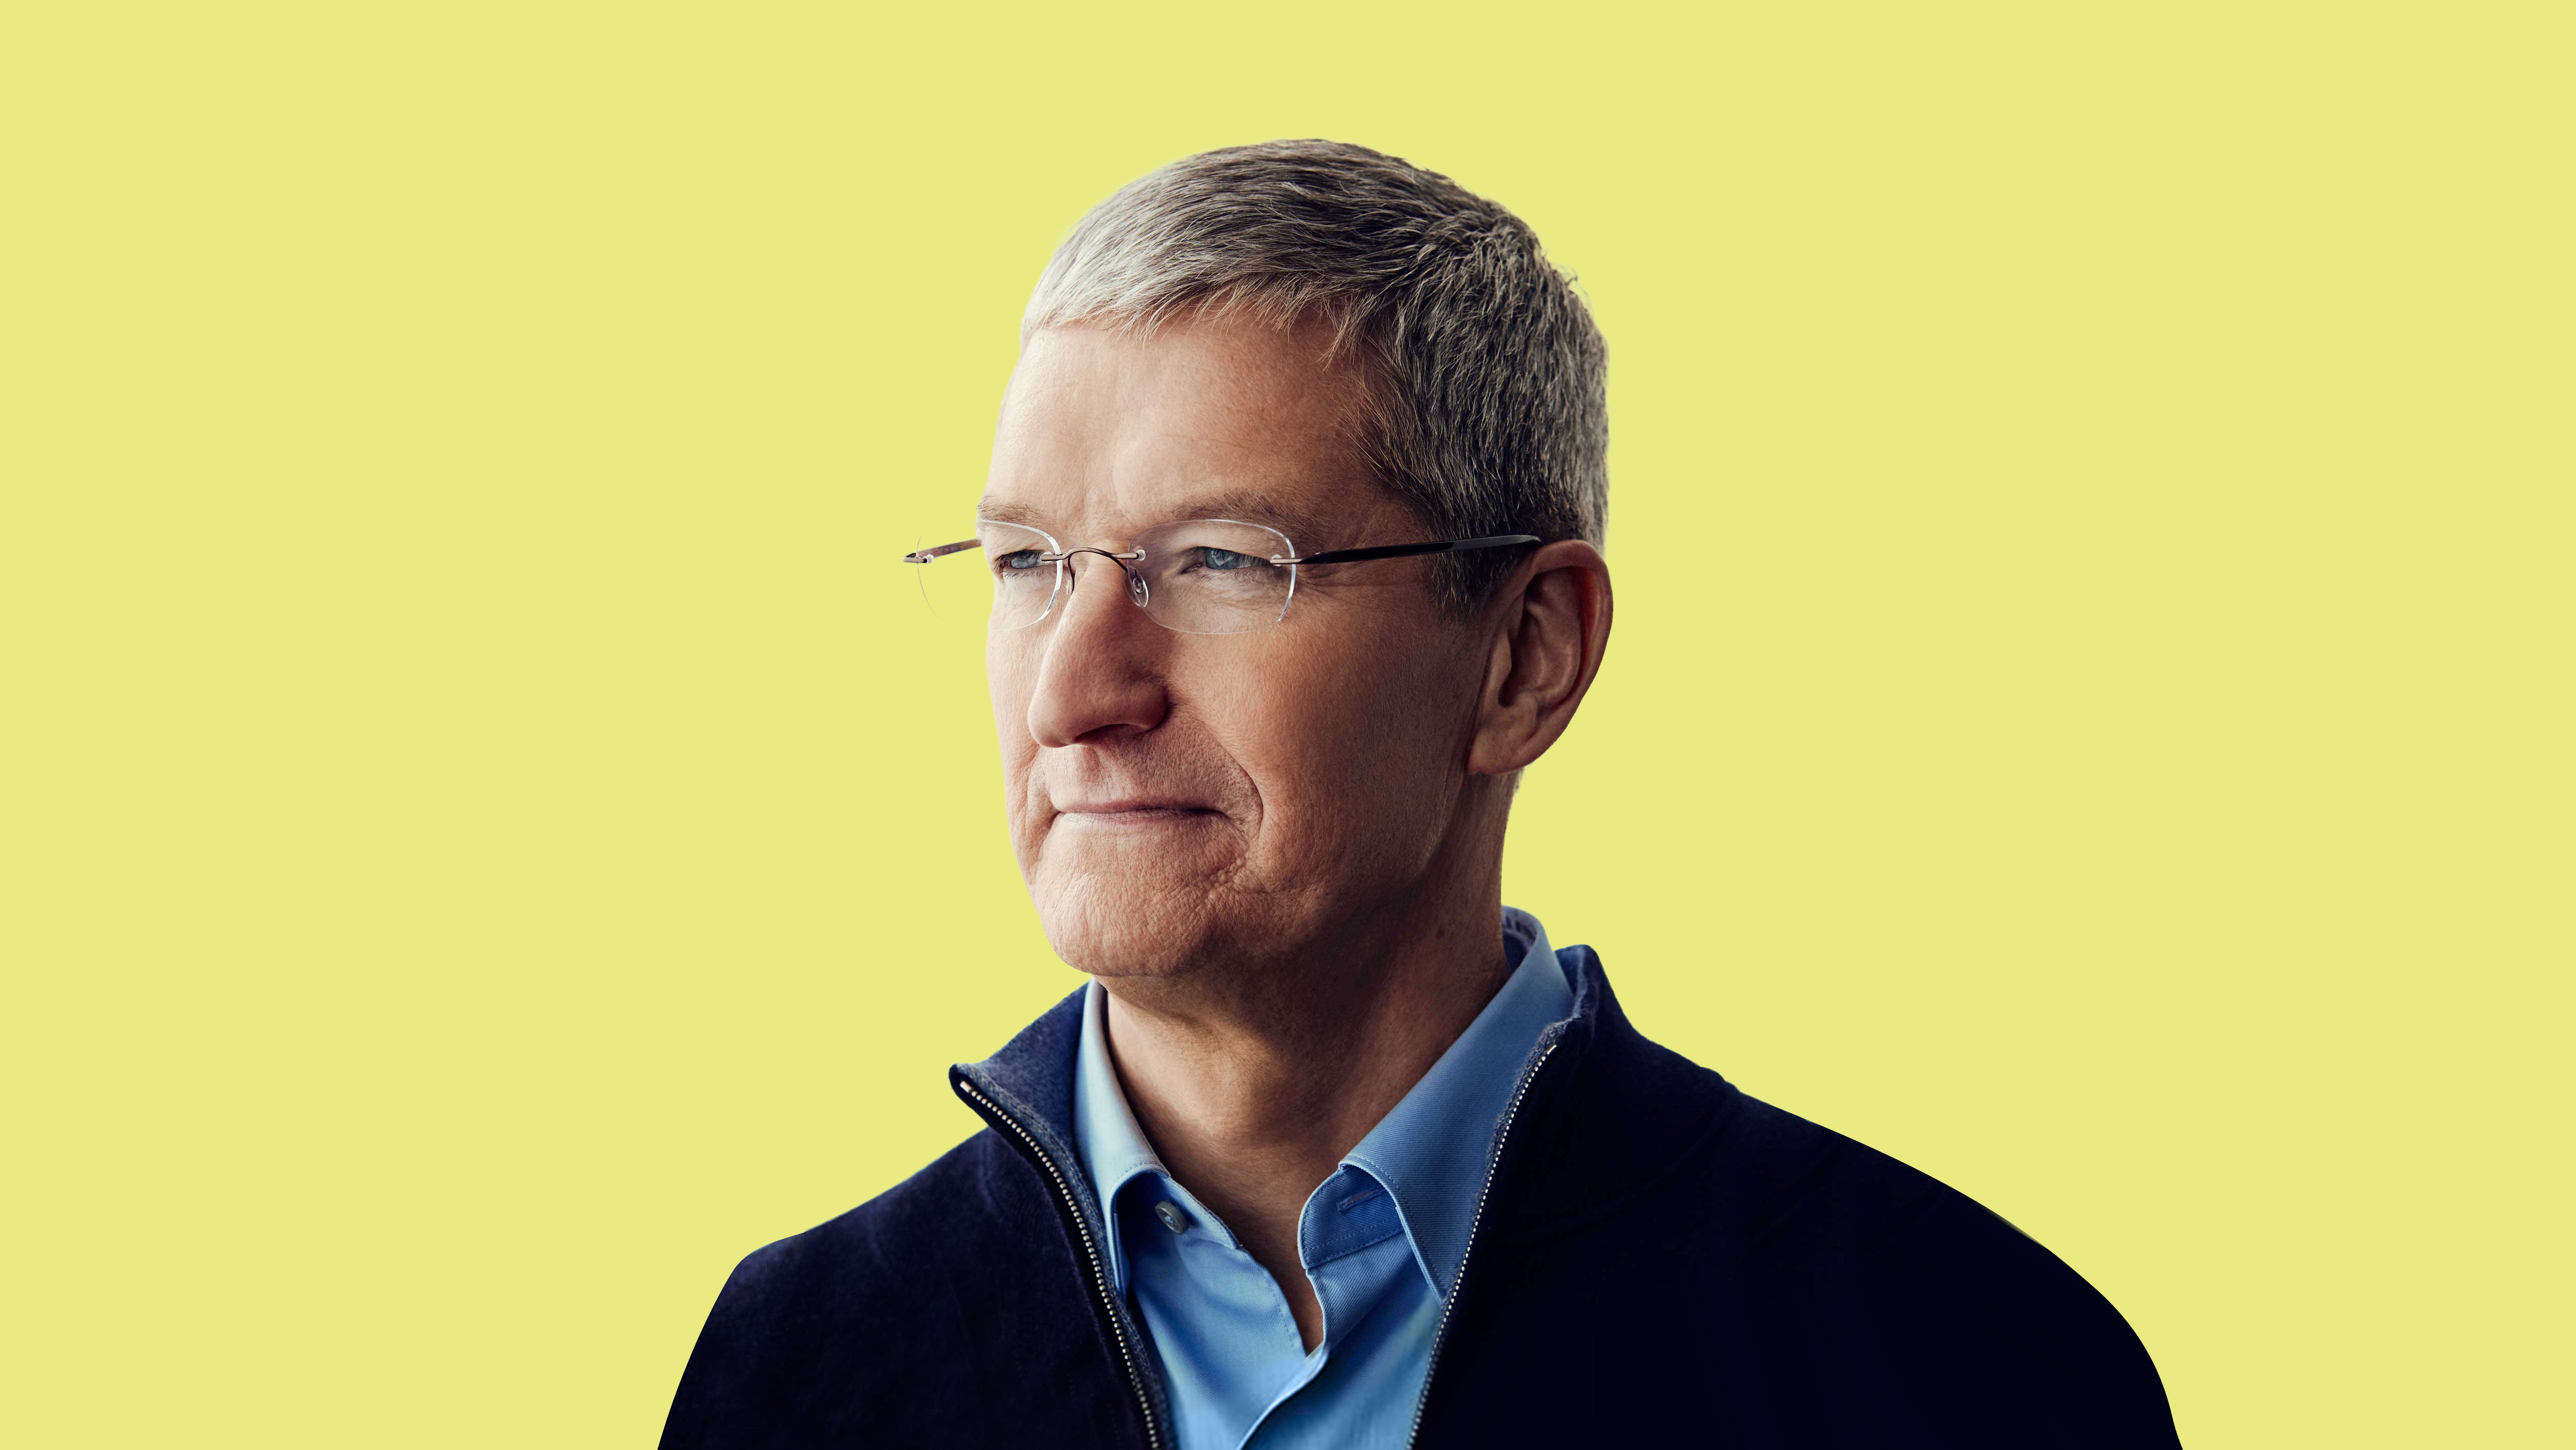 photo of Apple CEO Tim Cook Earns Spot on TIME's List of 100 Most Influential People of 2022 image